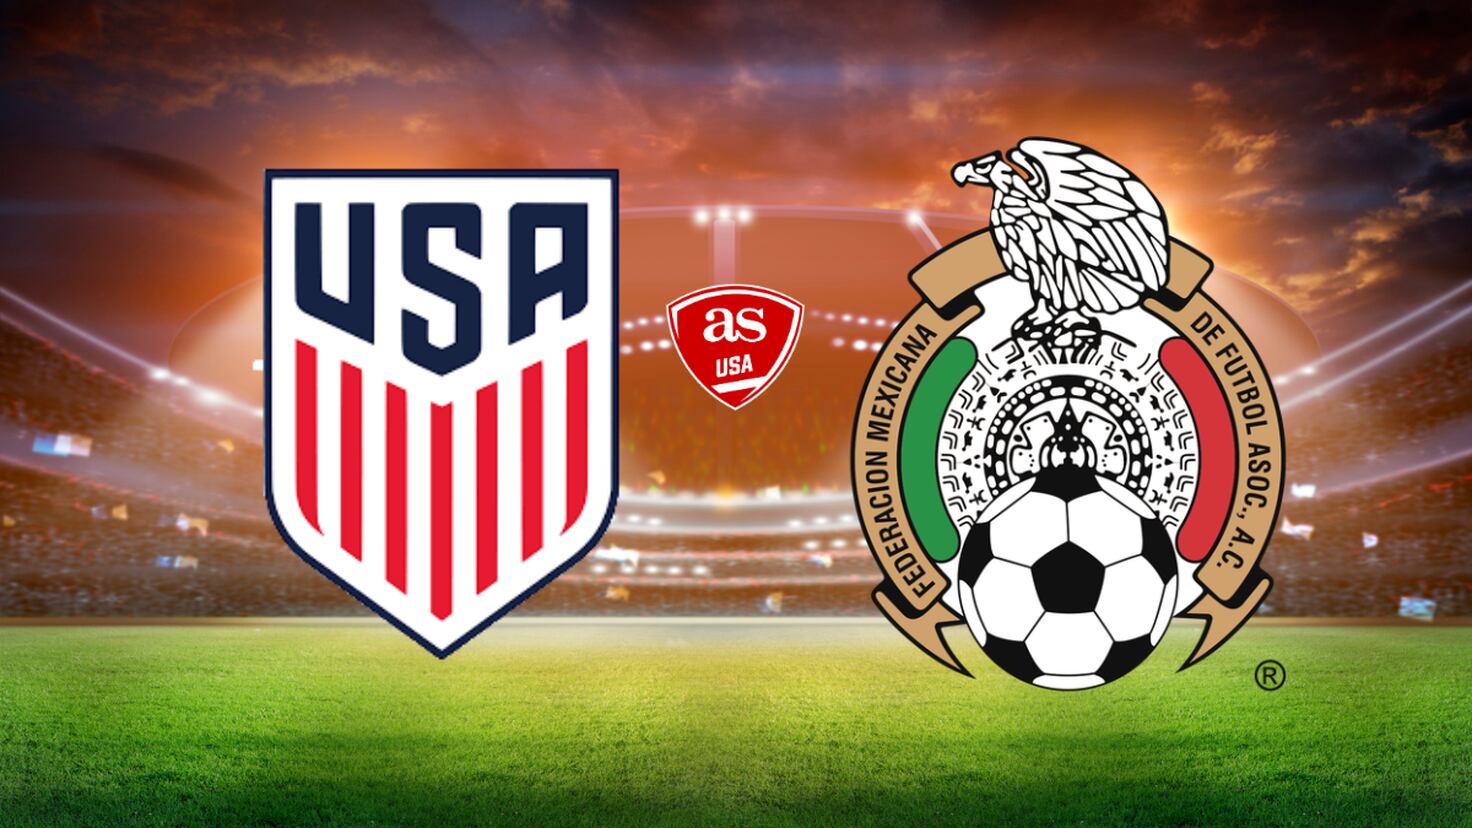 United States vs Mexico times, how to watch on TV, stream online